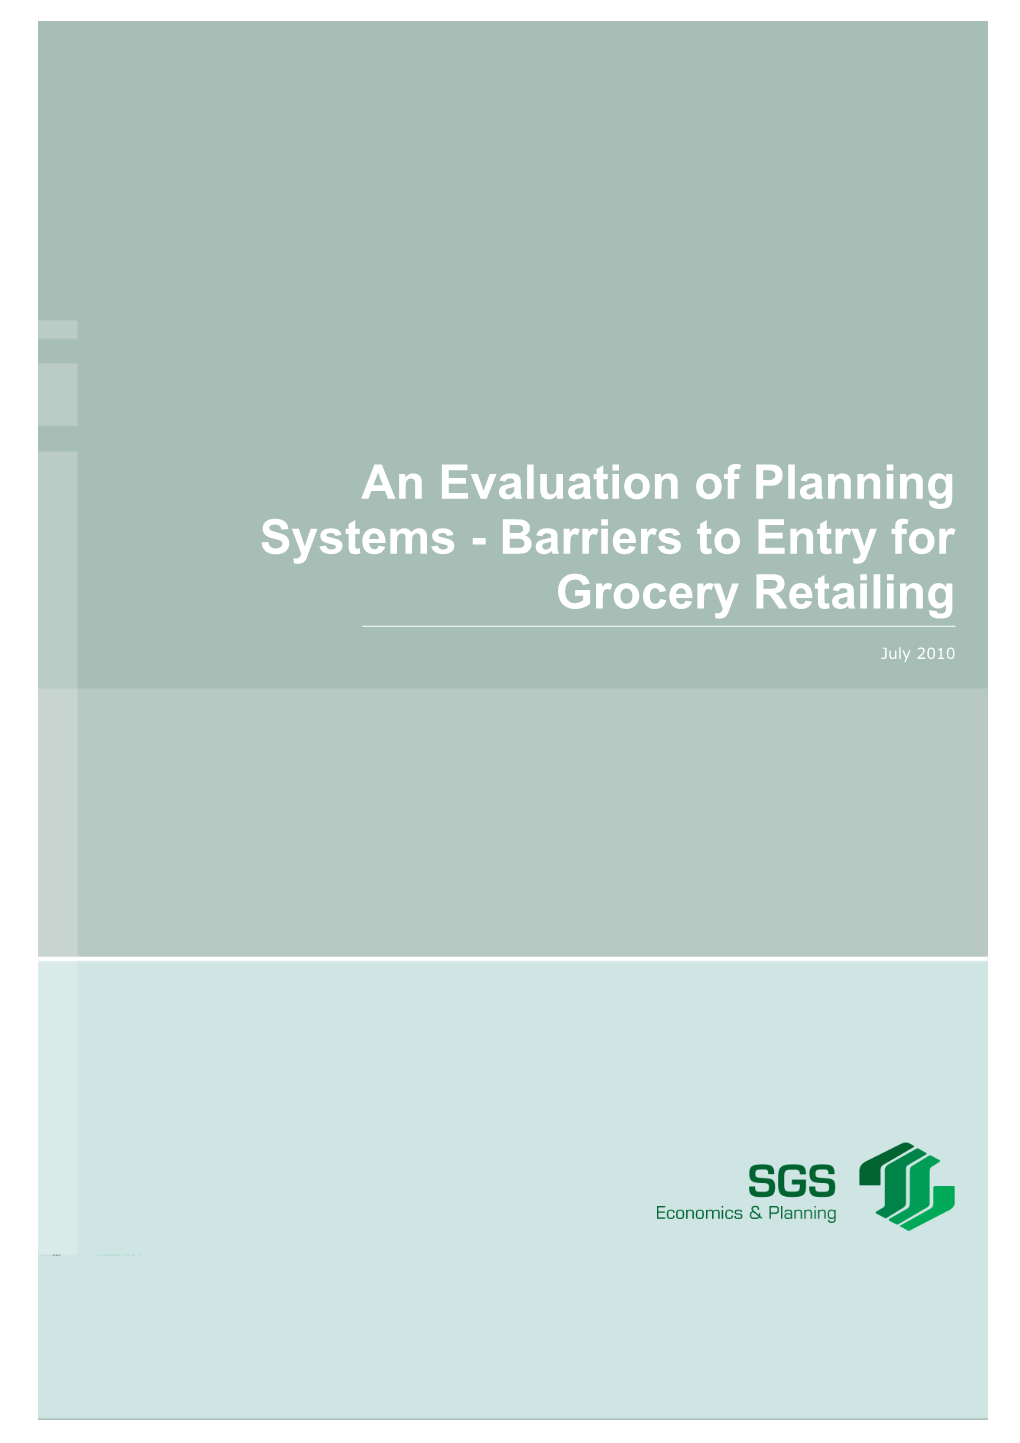 An Evaluation of Planning Systems - Barriers to Entry for Grocery Retailing